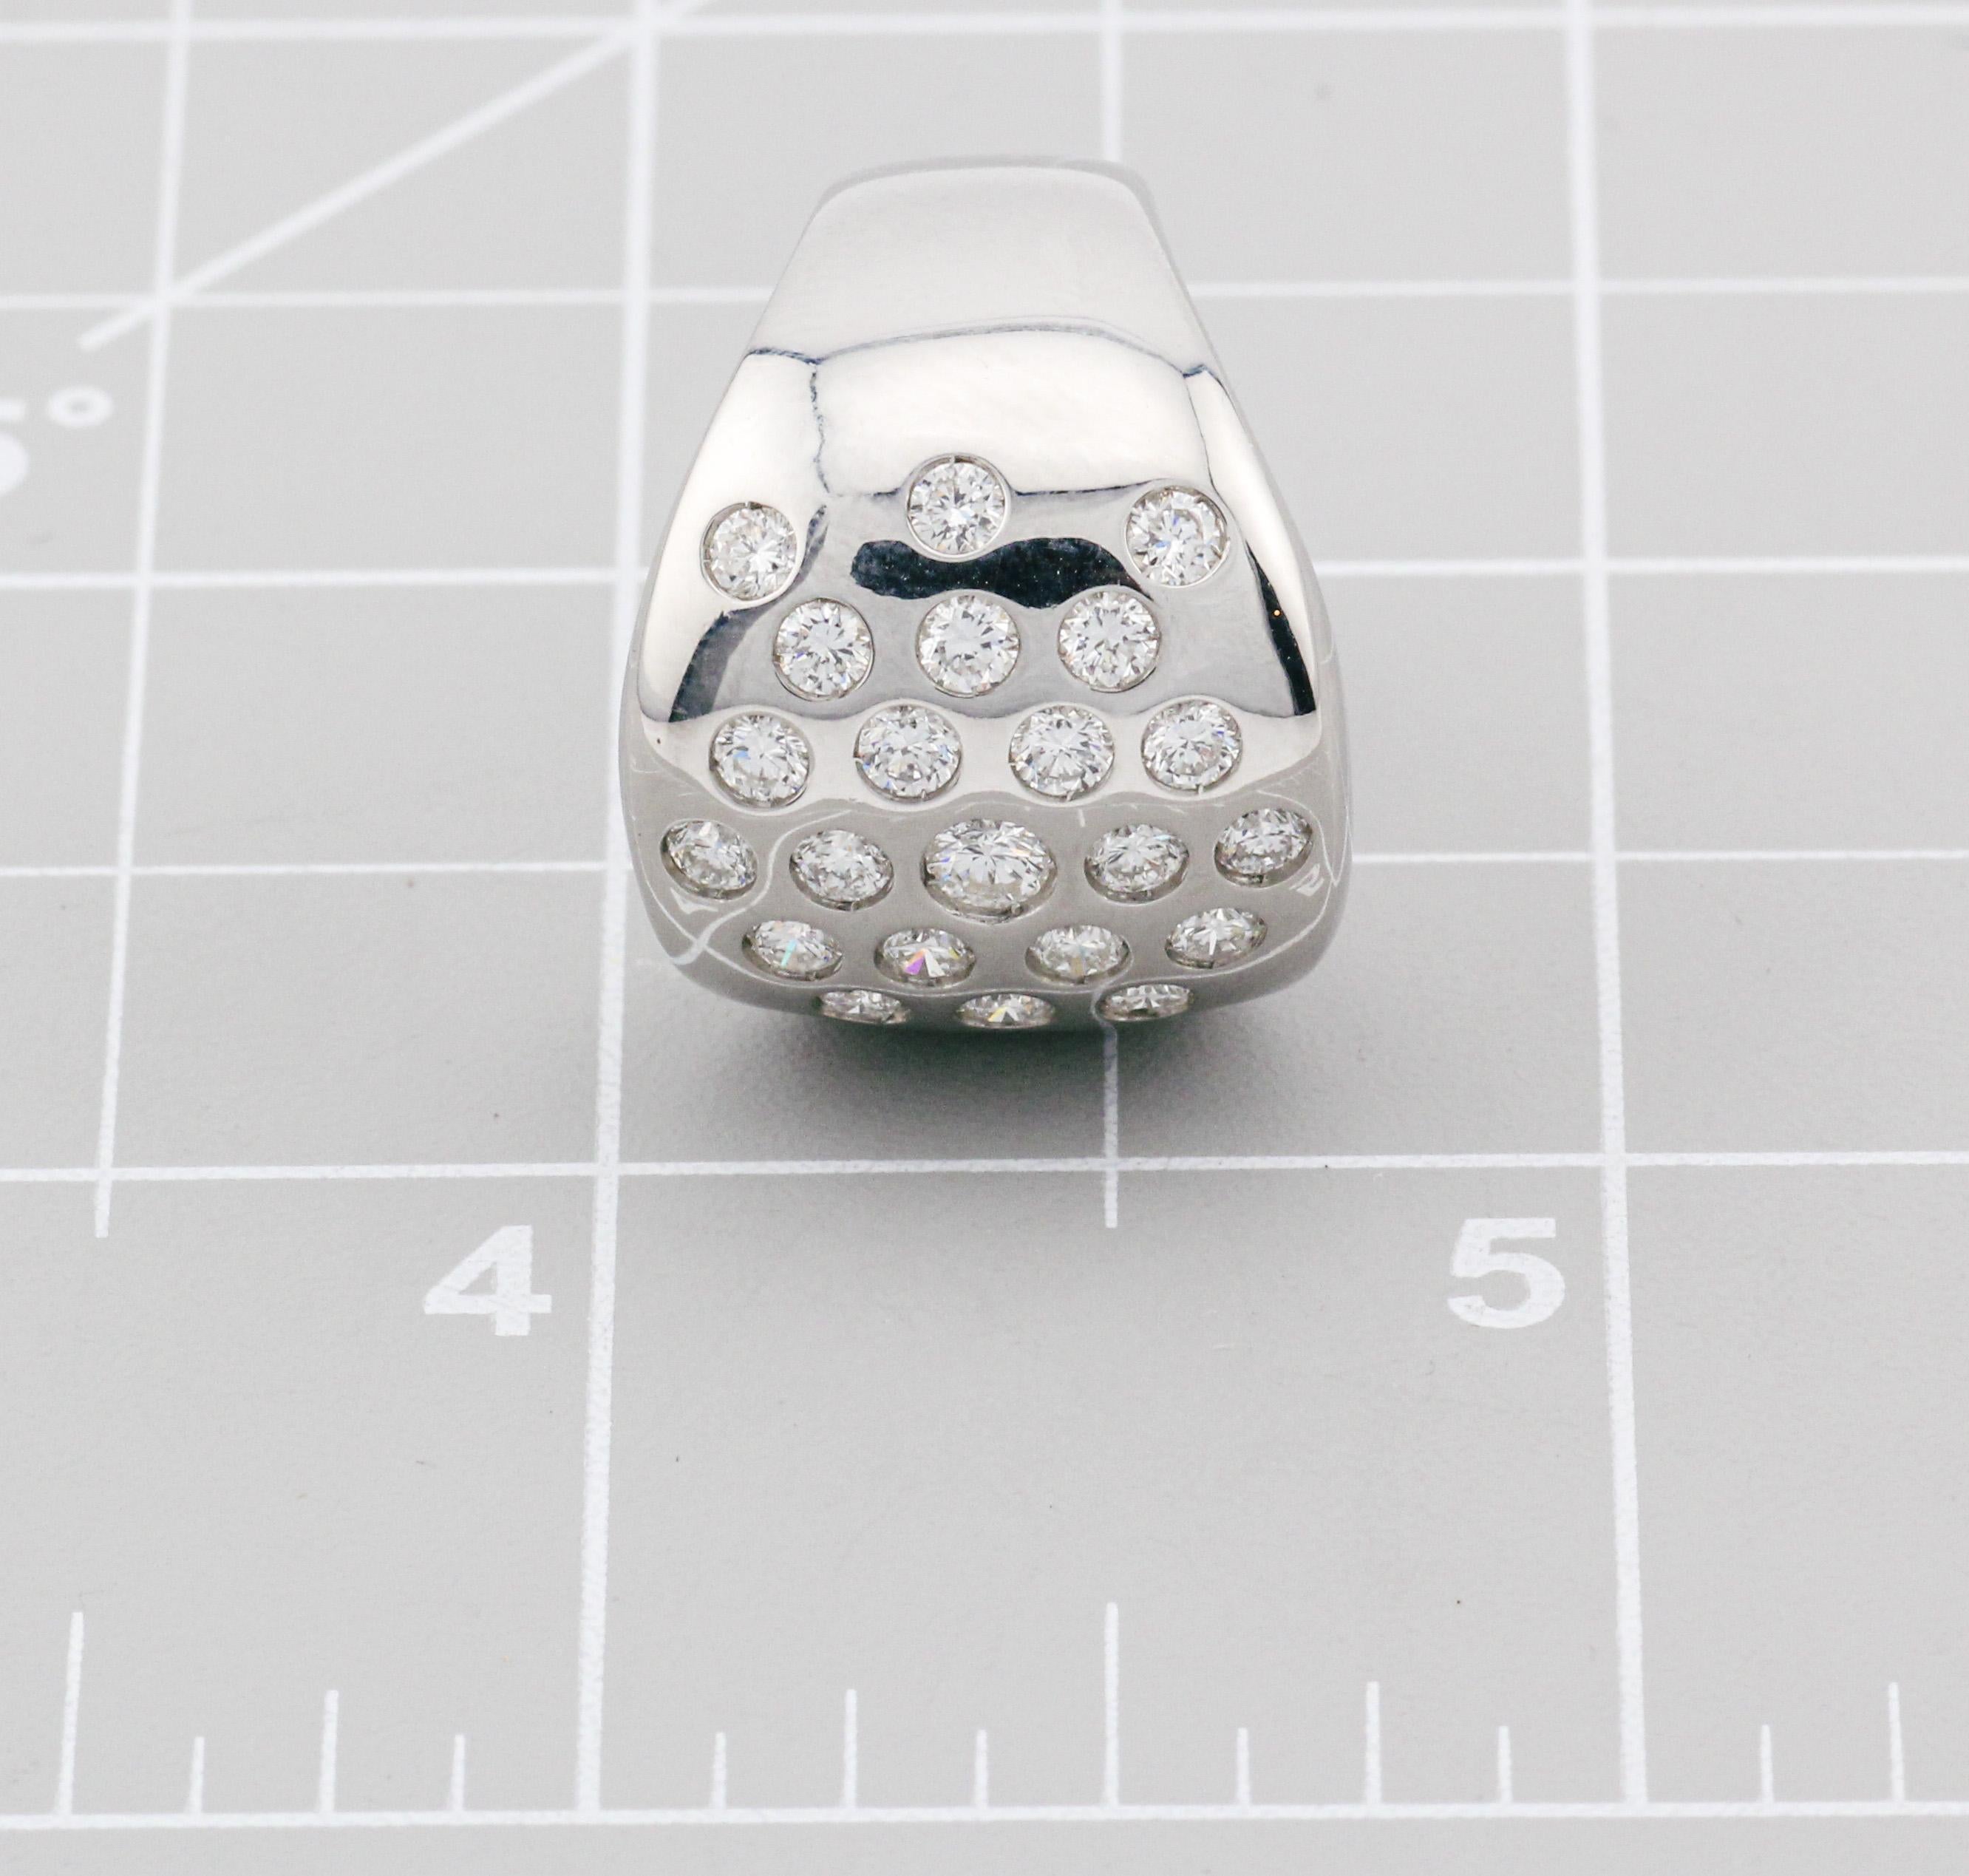 Hermes 1.45 Carat Diamond 18K White Gold Dome Ring Size 6 For Sale 8